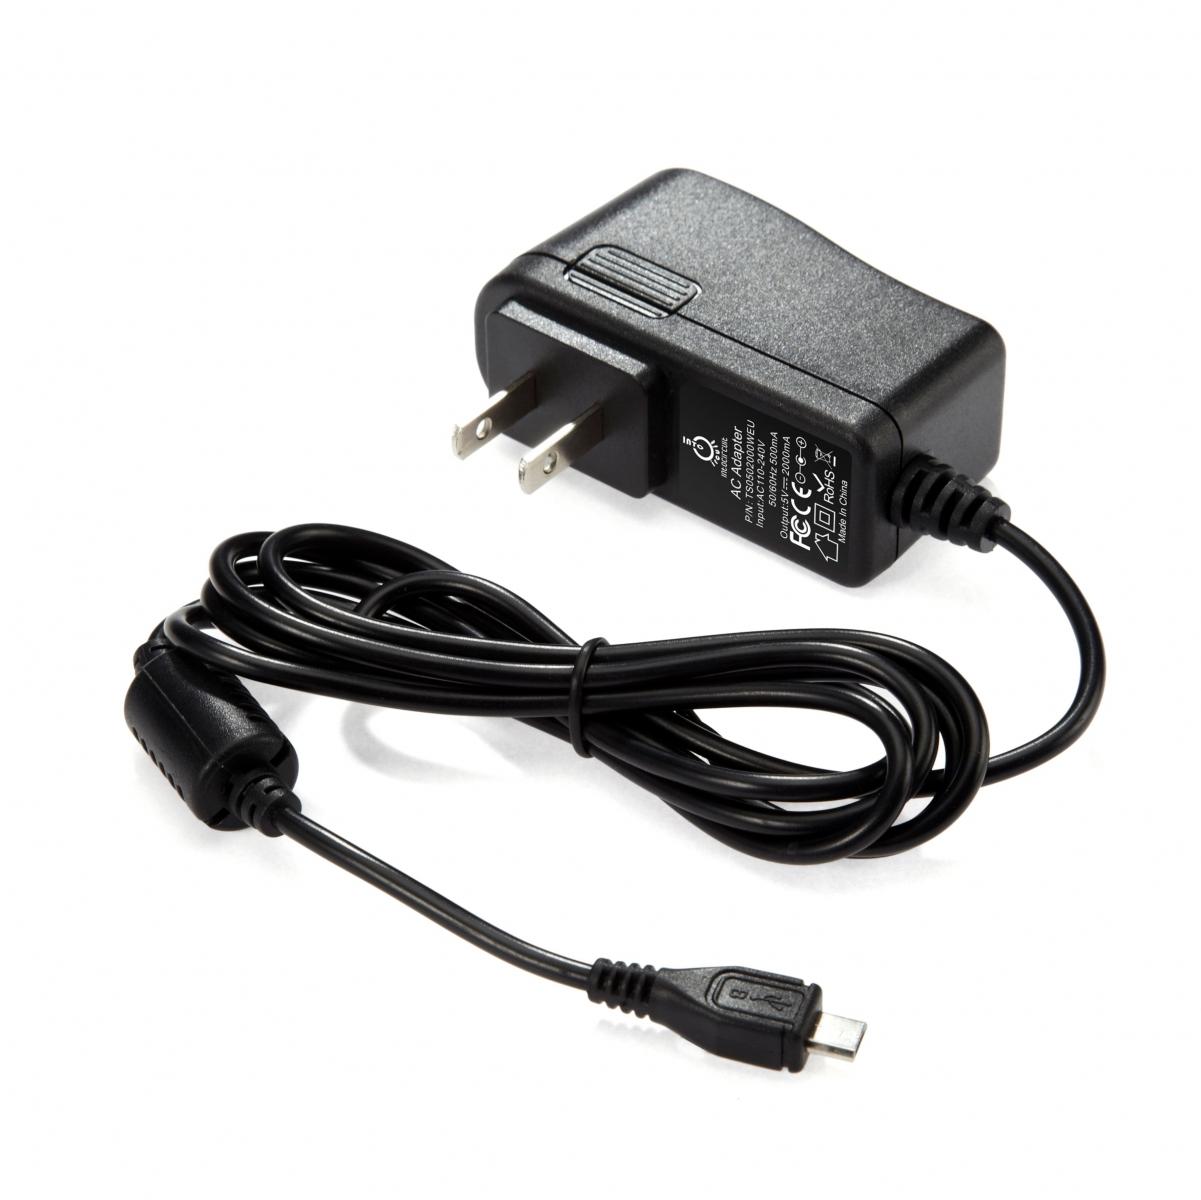 AC Adapter Charger for ASUS Transformer Book T100HA.